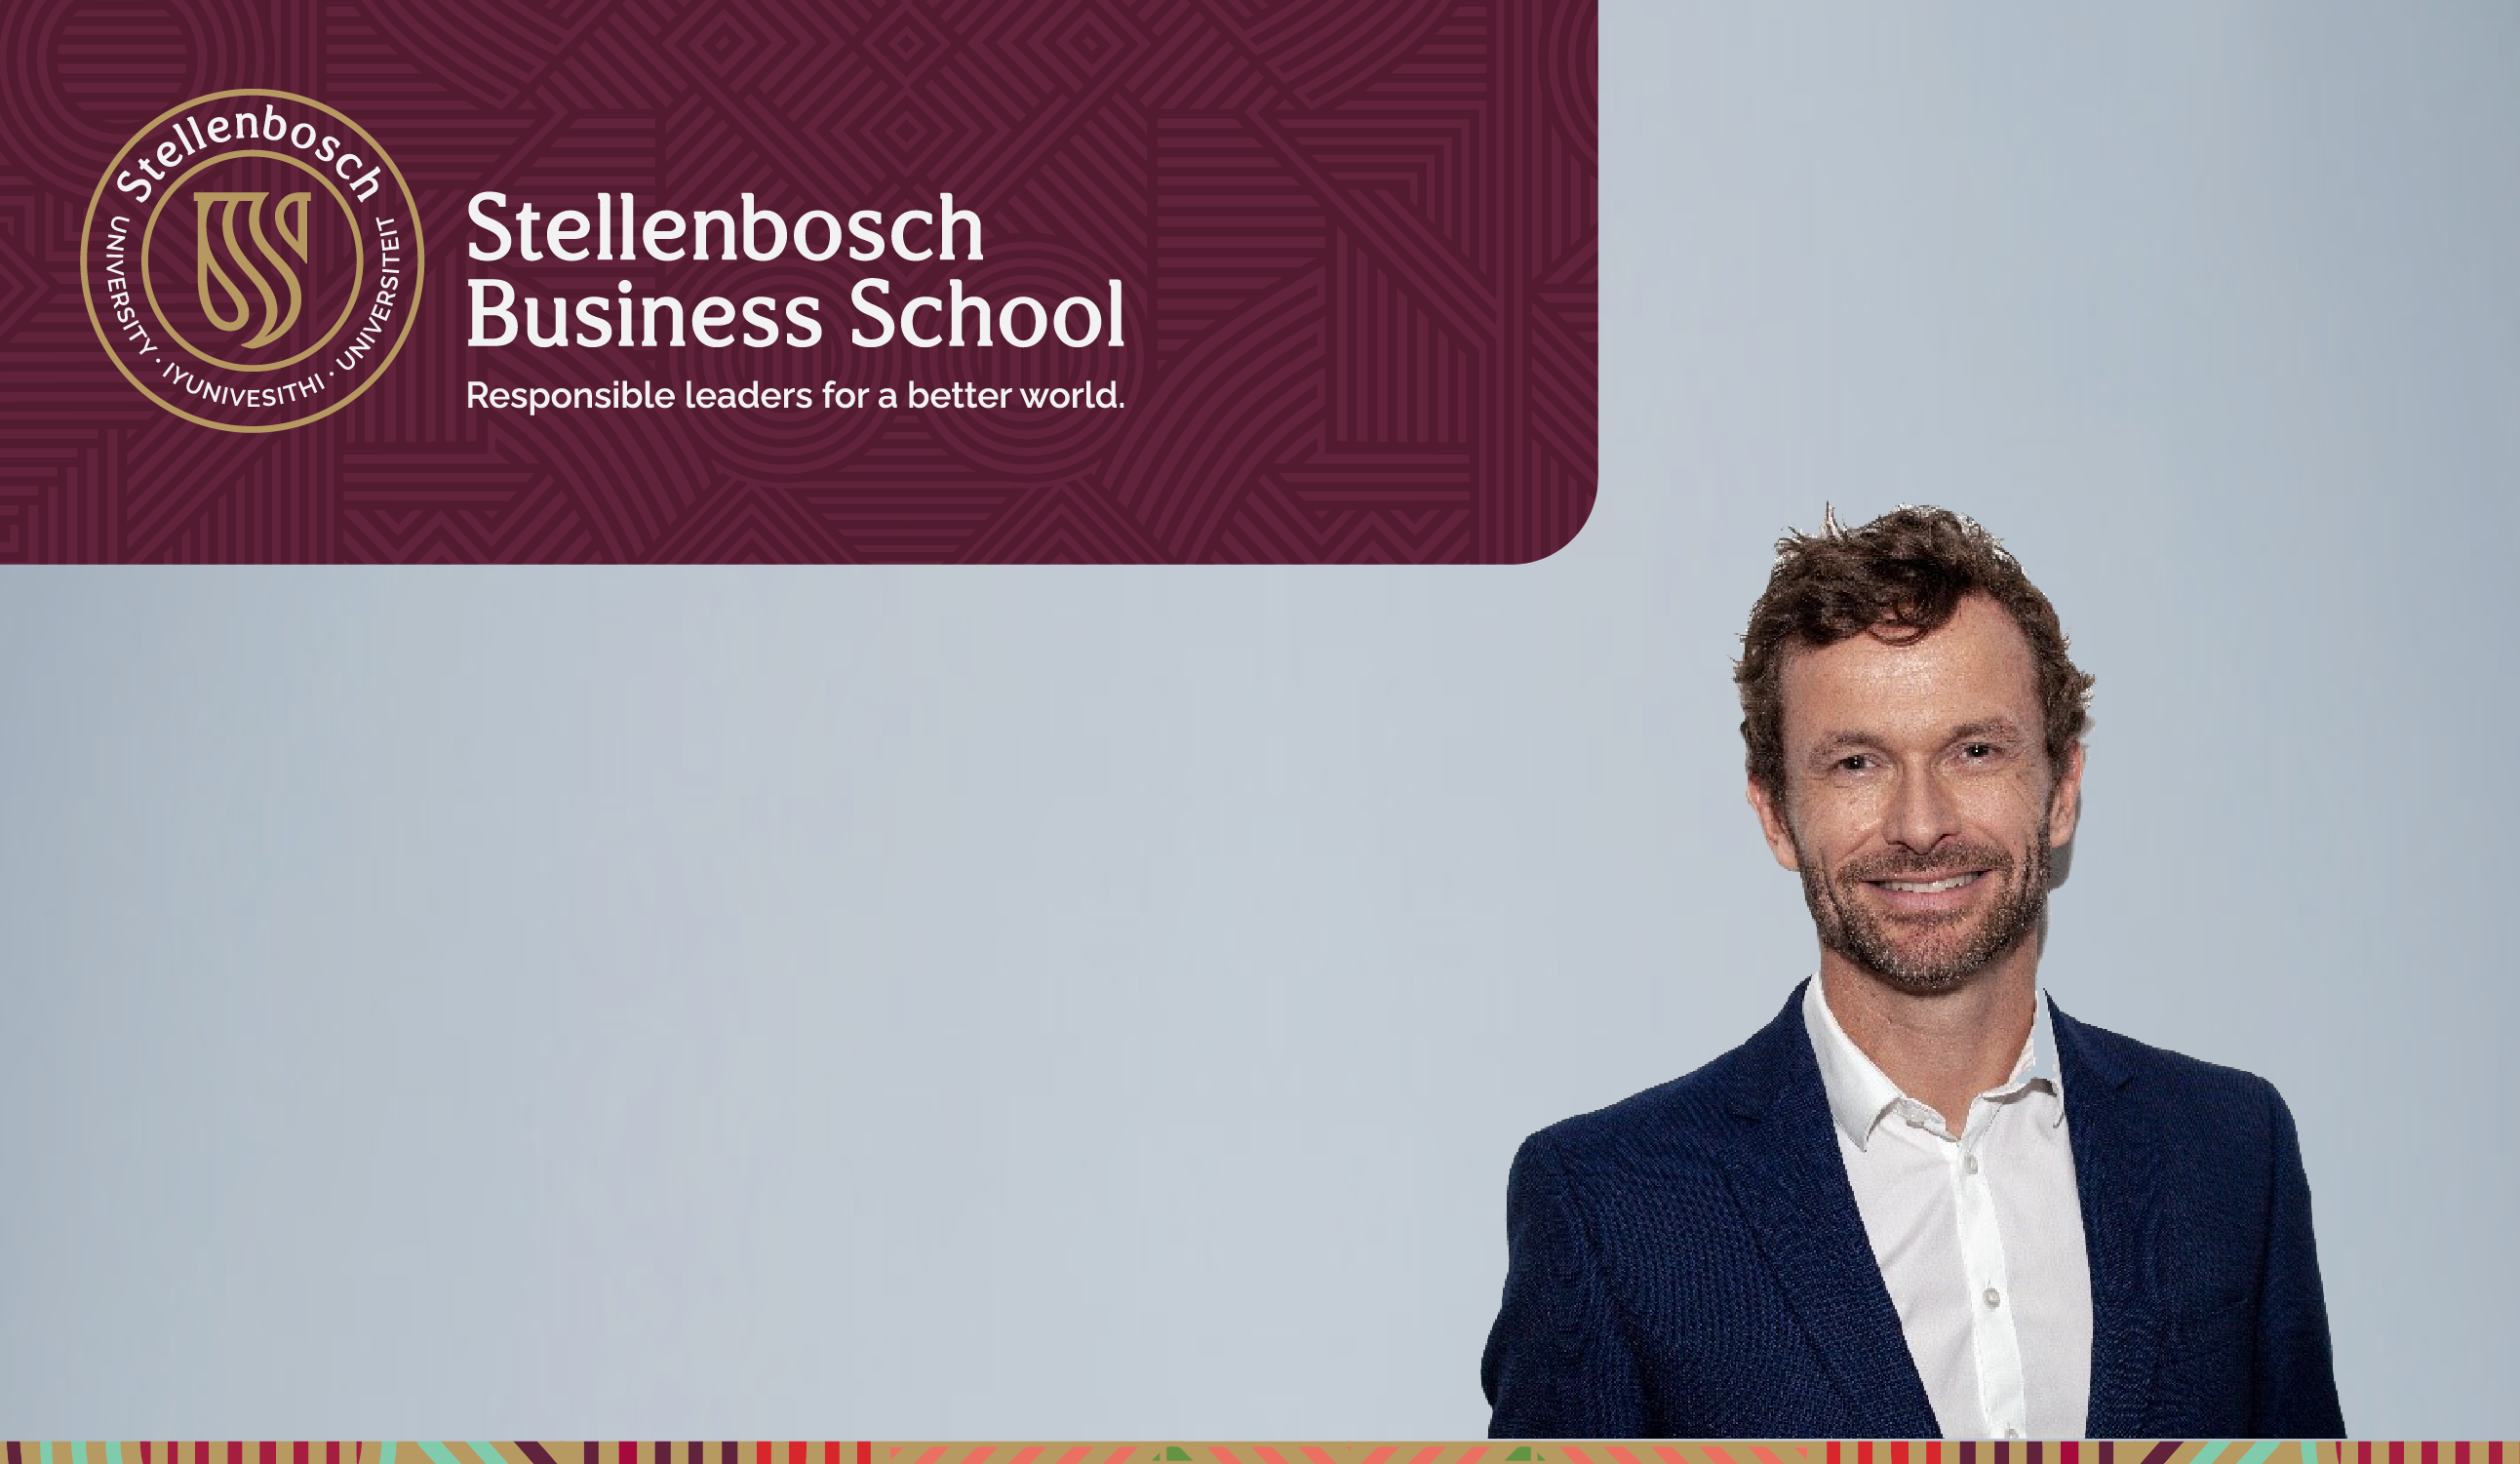 A business school committed to responsible leadership